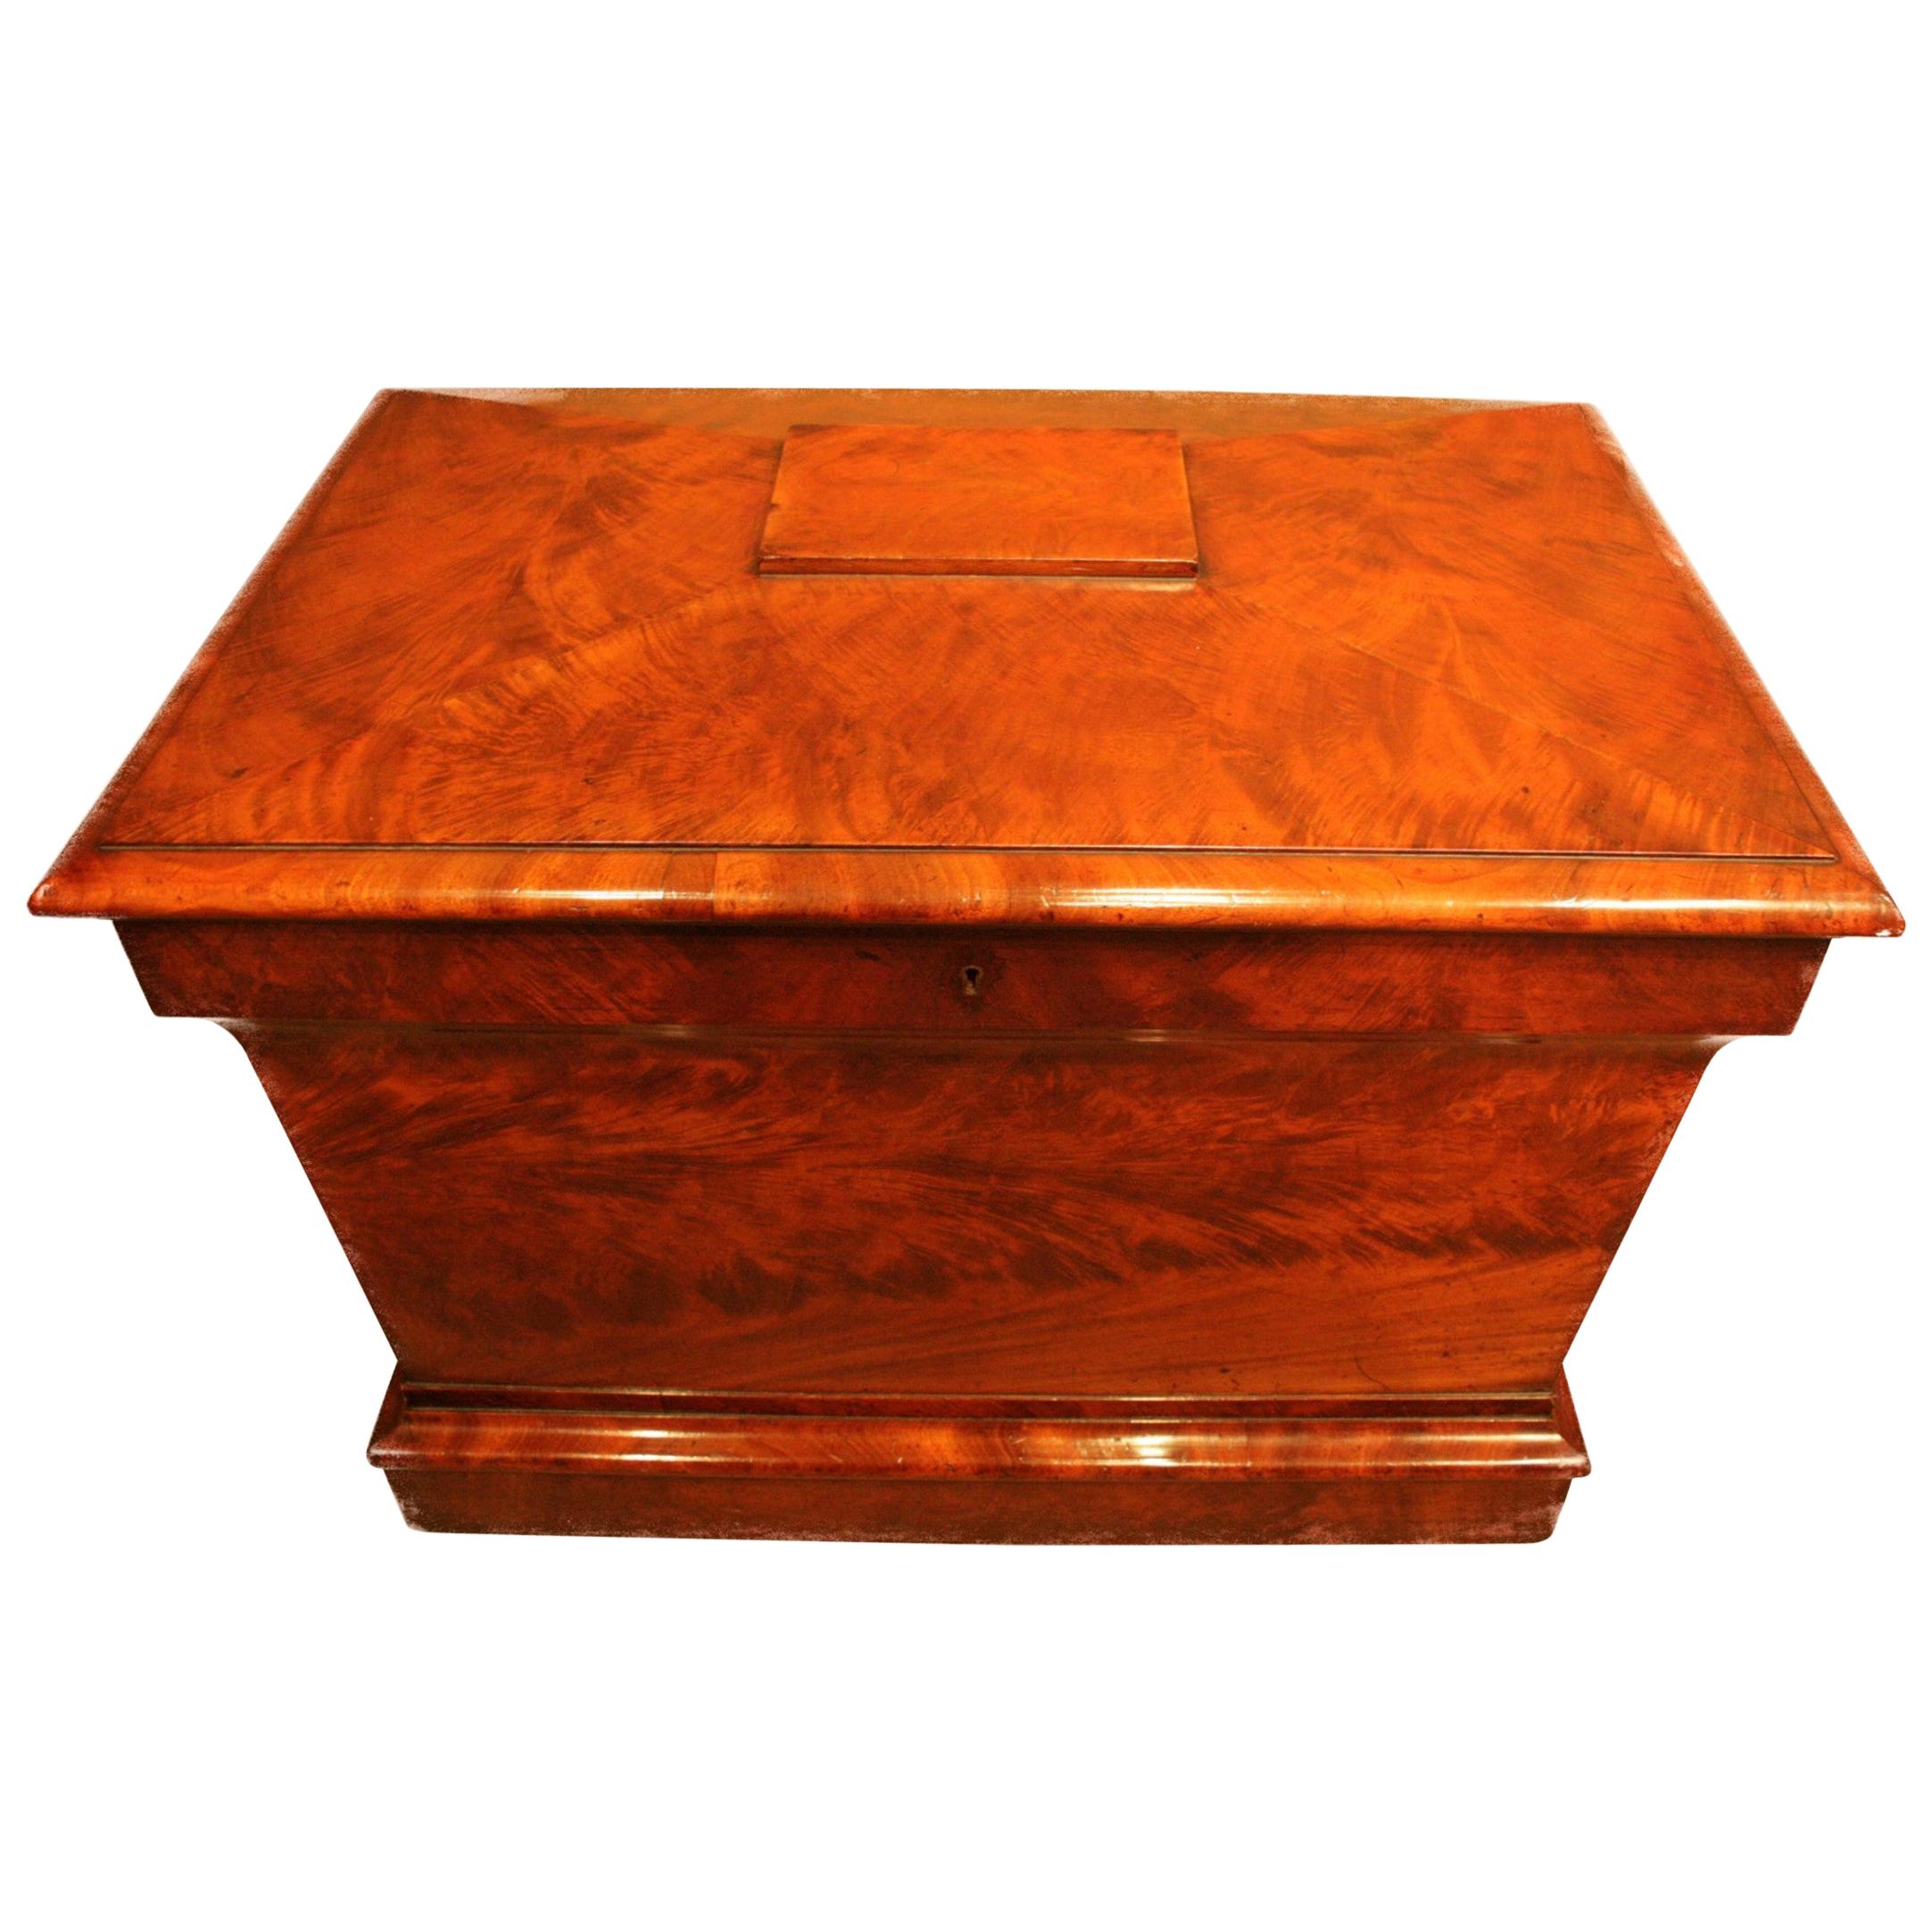 English Early 19th Century George III Flame Mahogany Sarcophagus Wine Cooler For Sale